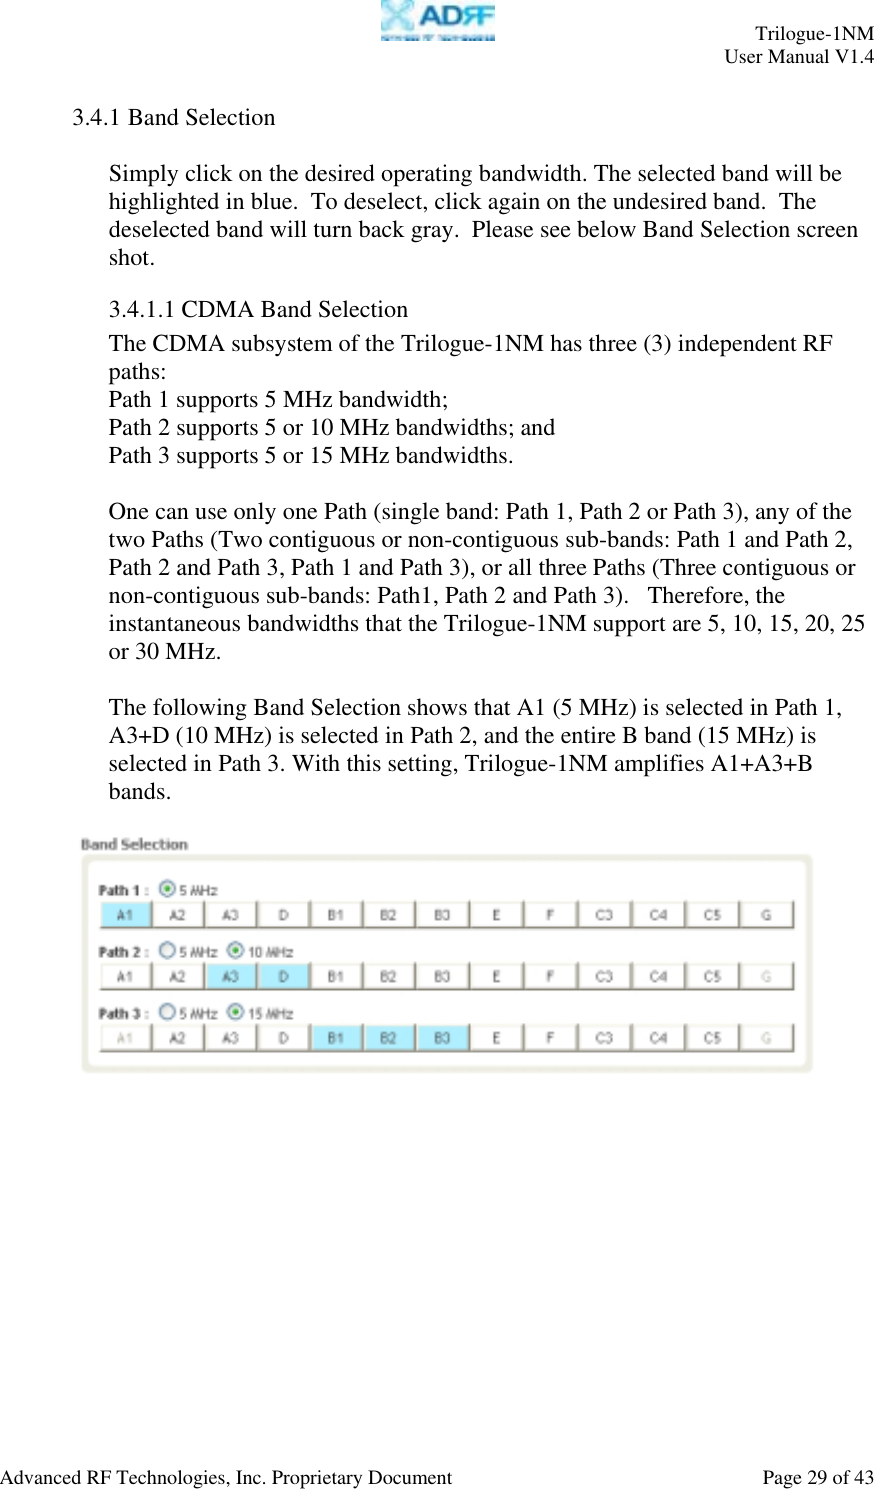     Trilogue-1NM User Manual V1.4  Advanced RF Technologies, Inc. Proprietary Document  Page 29 of 43  3.4.1 Band Selection  Simply click on the desired operating bandwidth. The selected band will be highlighted in blue.  To deselect, click again on the undesired band.  The deselected band will turn back gray.  Please see below Band Selection screen shot. 3.4.1.1 CDMA Band Selection The CDMA subsystem of the Trilogue-1NM has three (3) independent RF paths: Path 1 supports 5 MHz bandwidth;  Path 2 supports 5 or 10 MHz bandwidths; and  Path 3 supports 5 or 15 MHz bandwidths.  One can use only one Path (single band: Path 1, Path 2 or Path 3), any of the two Paths (Two contiguous or non-contiguous sub-bands: Path 1 and Path 2, Path 2 and Path 3, Path 1 and Path 3), or all three Paths (Three contiguous or non-contiguous sub-bands: Path1, Path 2 and Path 3).   Therefore, the instantaneous bandwidths that the Trilogue-1NM support are 5, 10, 15, 20, 25 or 30 MHz.  The following Band Selection shows that A1 (5 MHz) is selected in Path 1, A3+D (10 MHz) is selected in Path 2, and the entire B band (15 MHz) is selected in Path 3. With this setting, Trilogue-1NM amplifies A1+A3+B bands.     